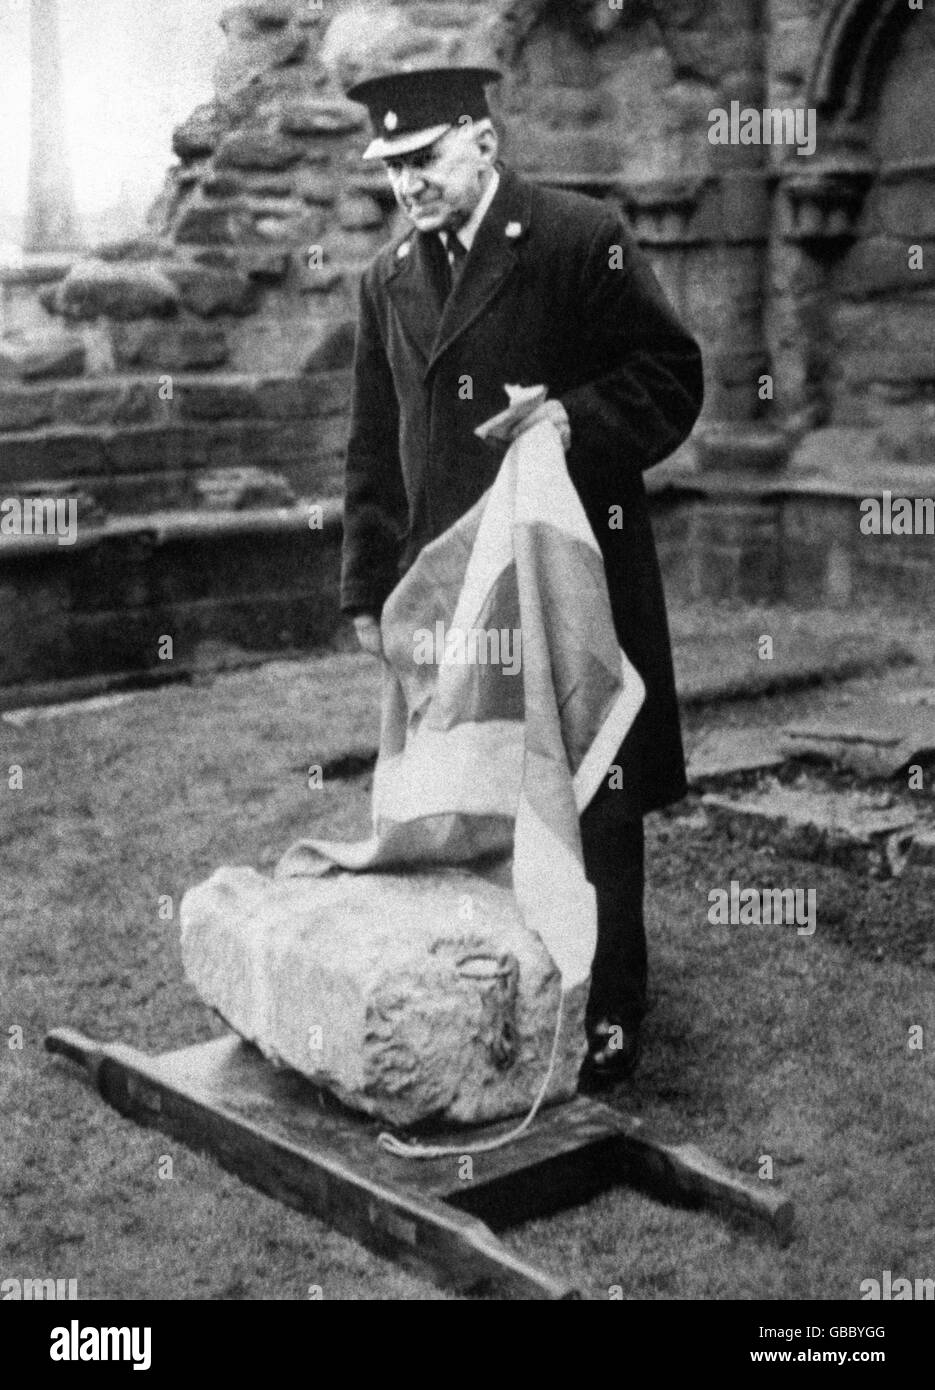 A stone - said to be the Scottish Stone of Destiny (Stone of Scone) but awaiting positive identification - was removed from Arbroath Abbey, Forfarshire, by police, who believed it to be the Stone of Scone stolen from Westminster Abbey. Stock Photo